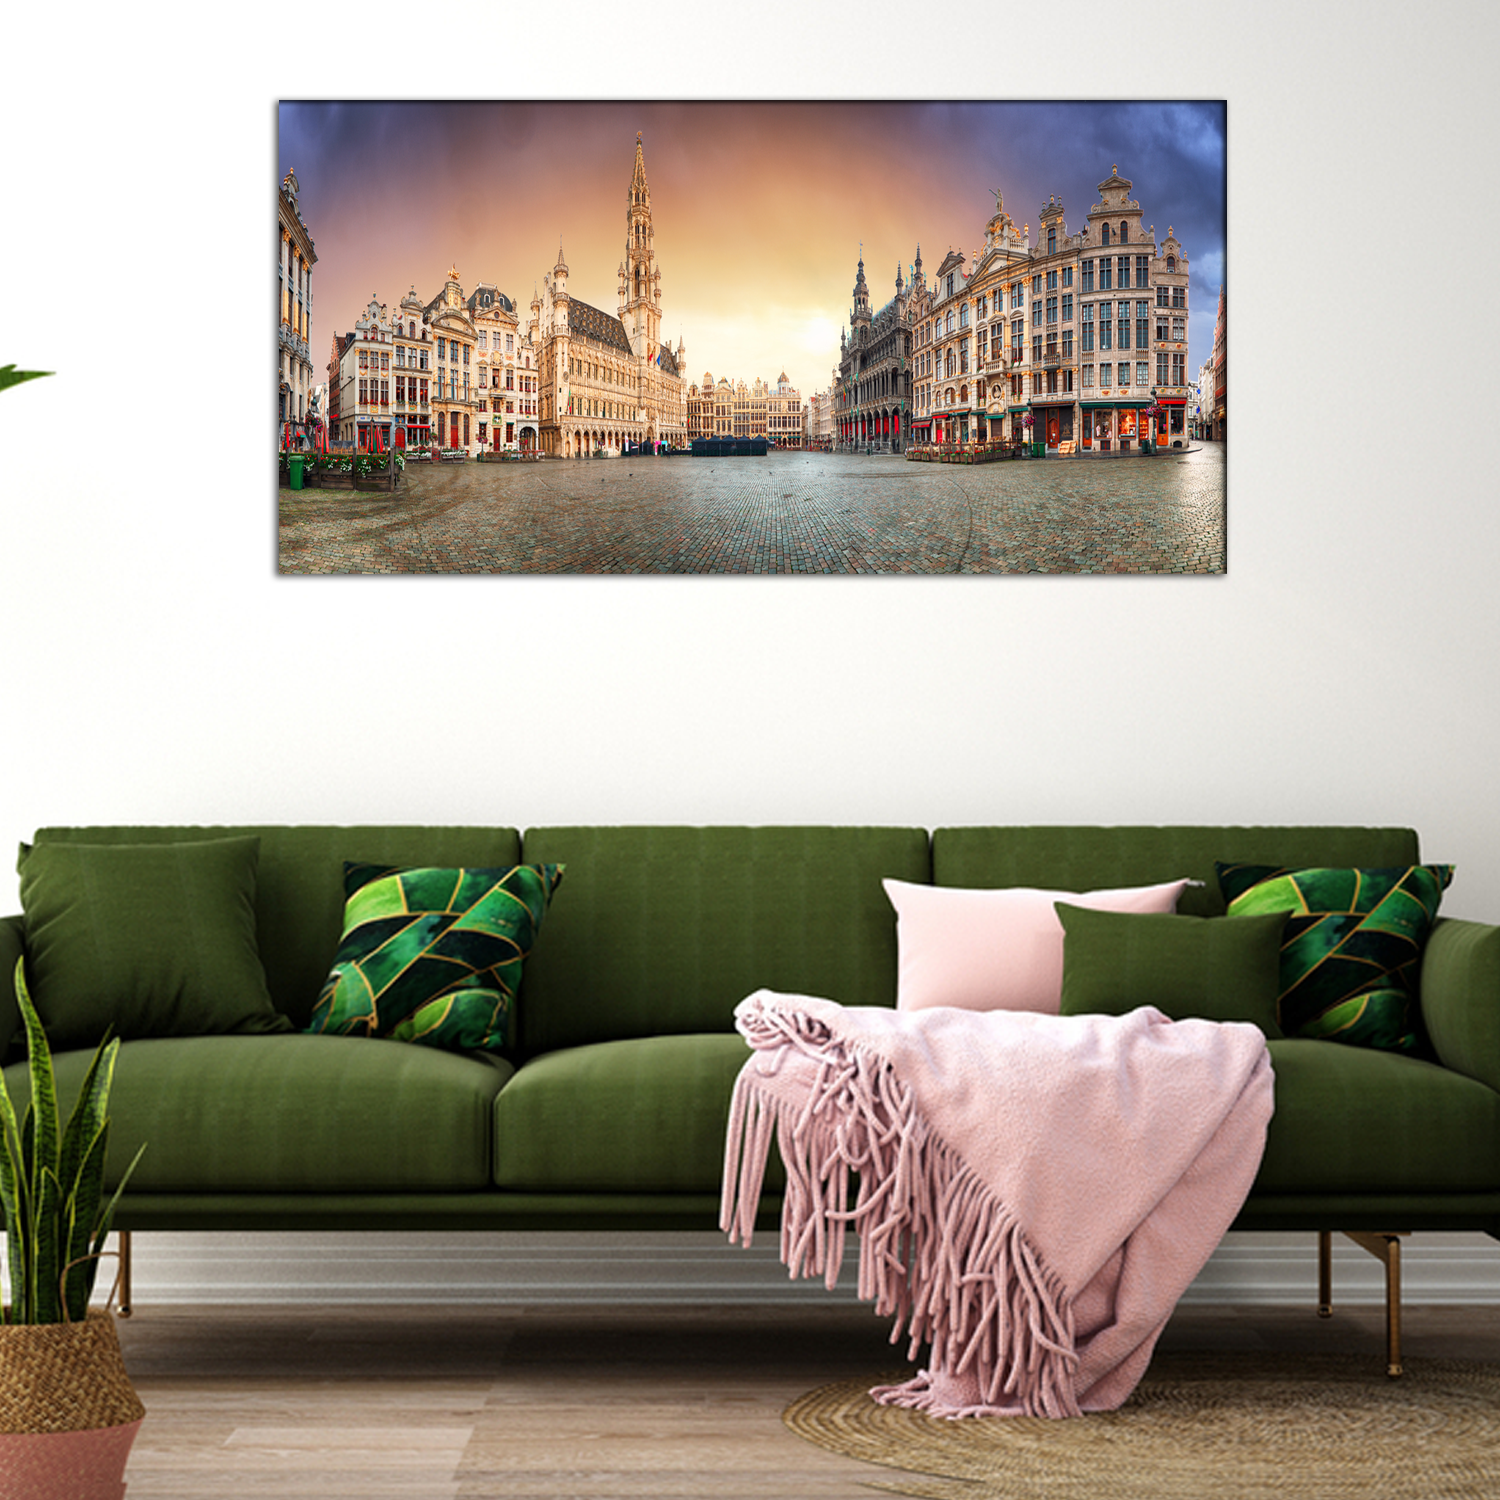 City View Canvas Print Wall Painting